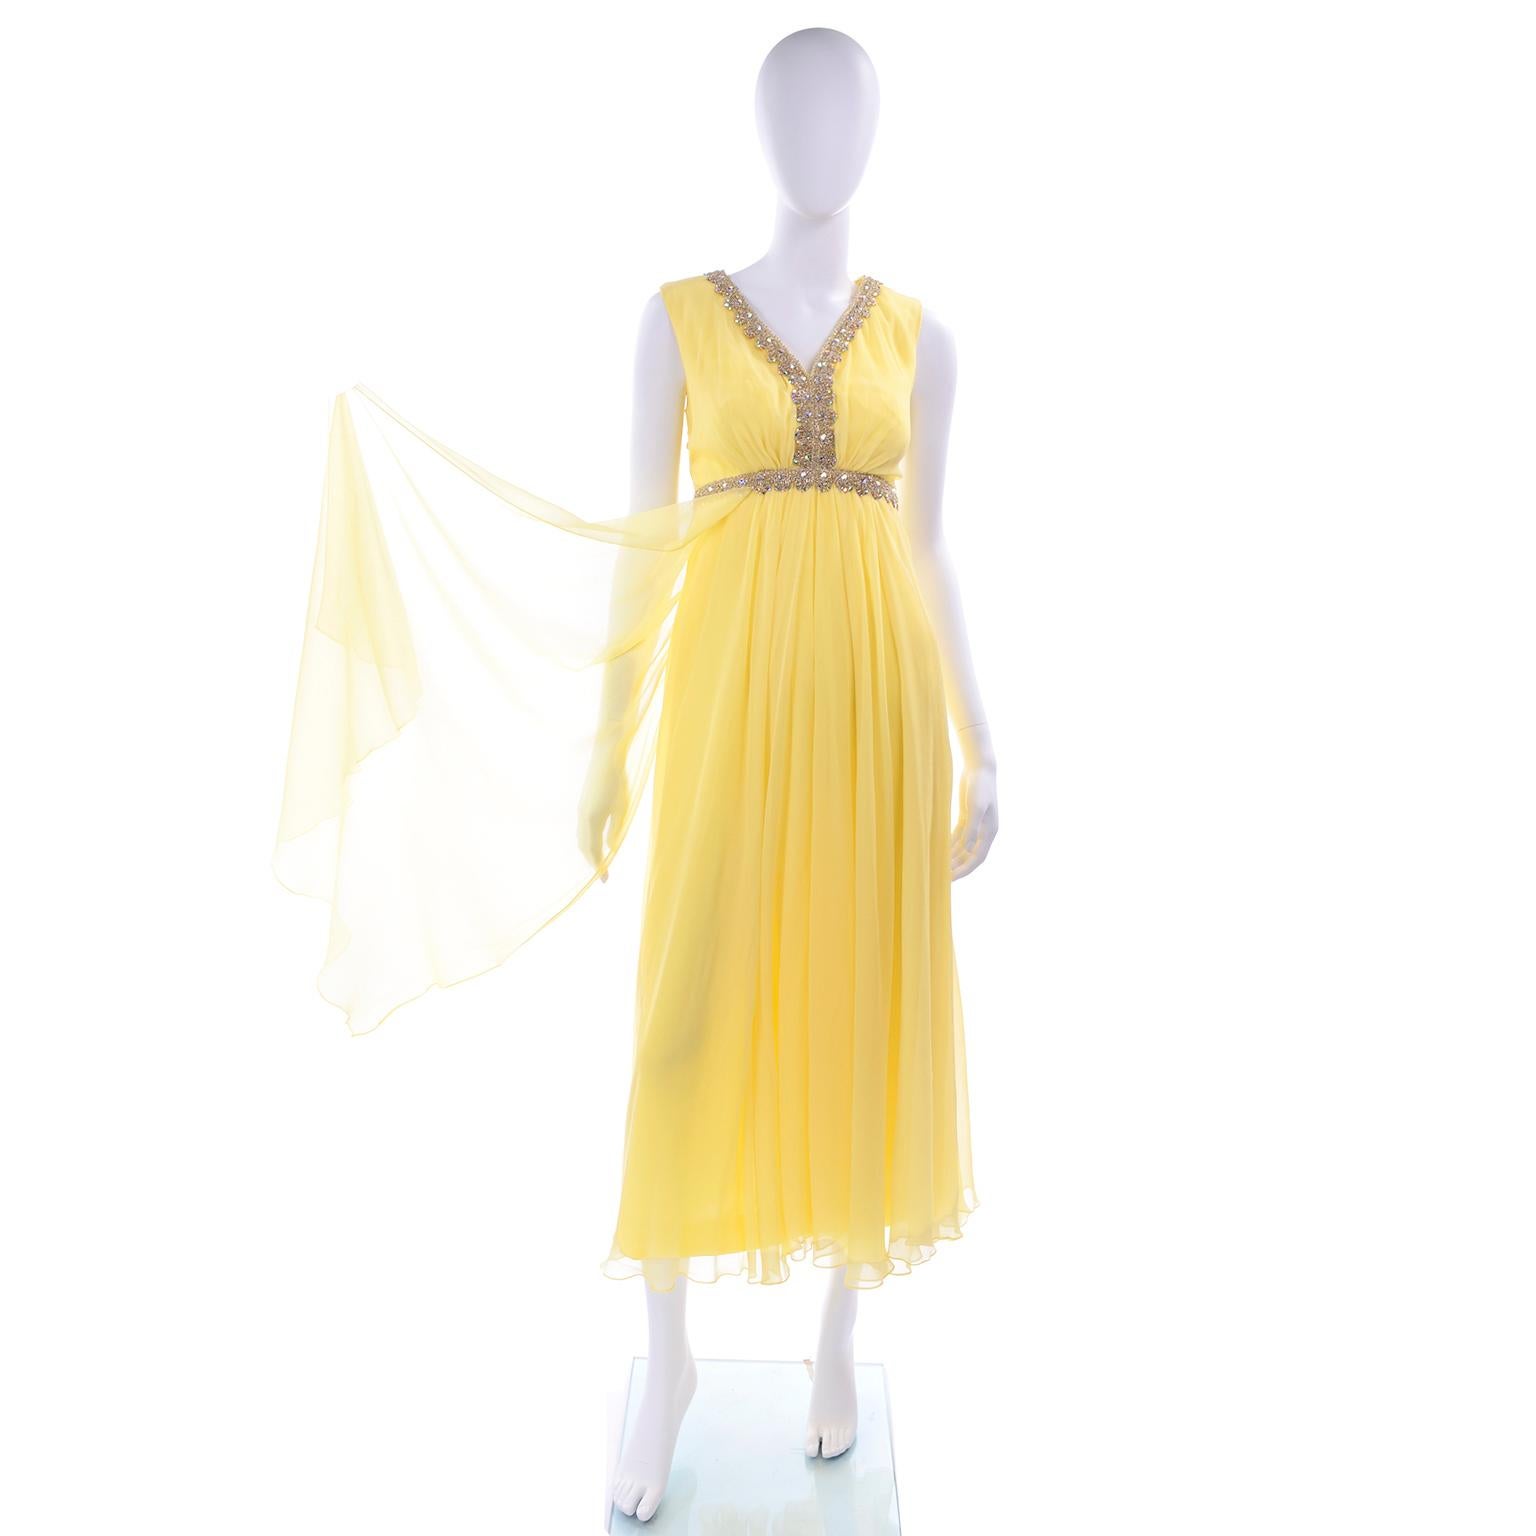 This is a beautiful yellow silk chiffon empire waist evening gown from the 1960's with pretty gold metallic trim and prong set rhinestones. The dress has flyaway panels in the front and closes with a metal back zipper and hook and eye. This fully